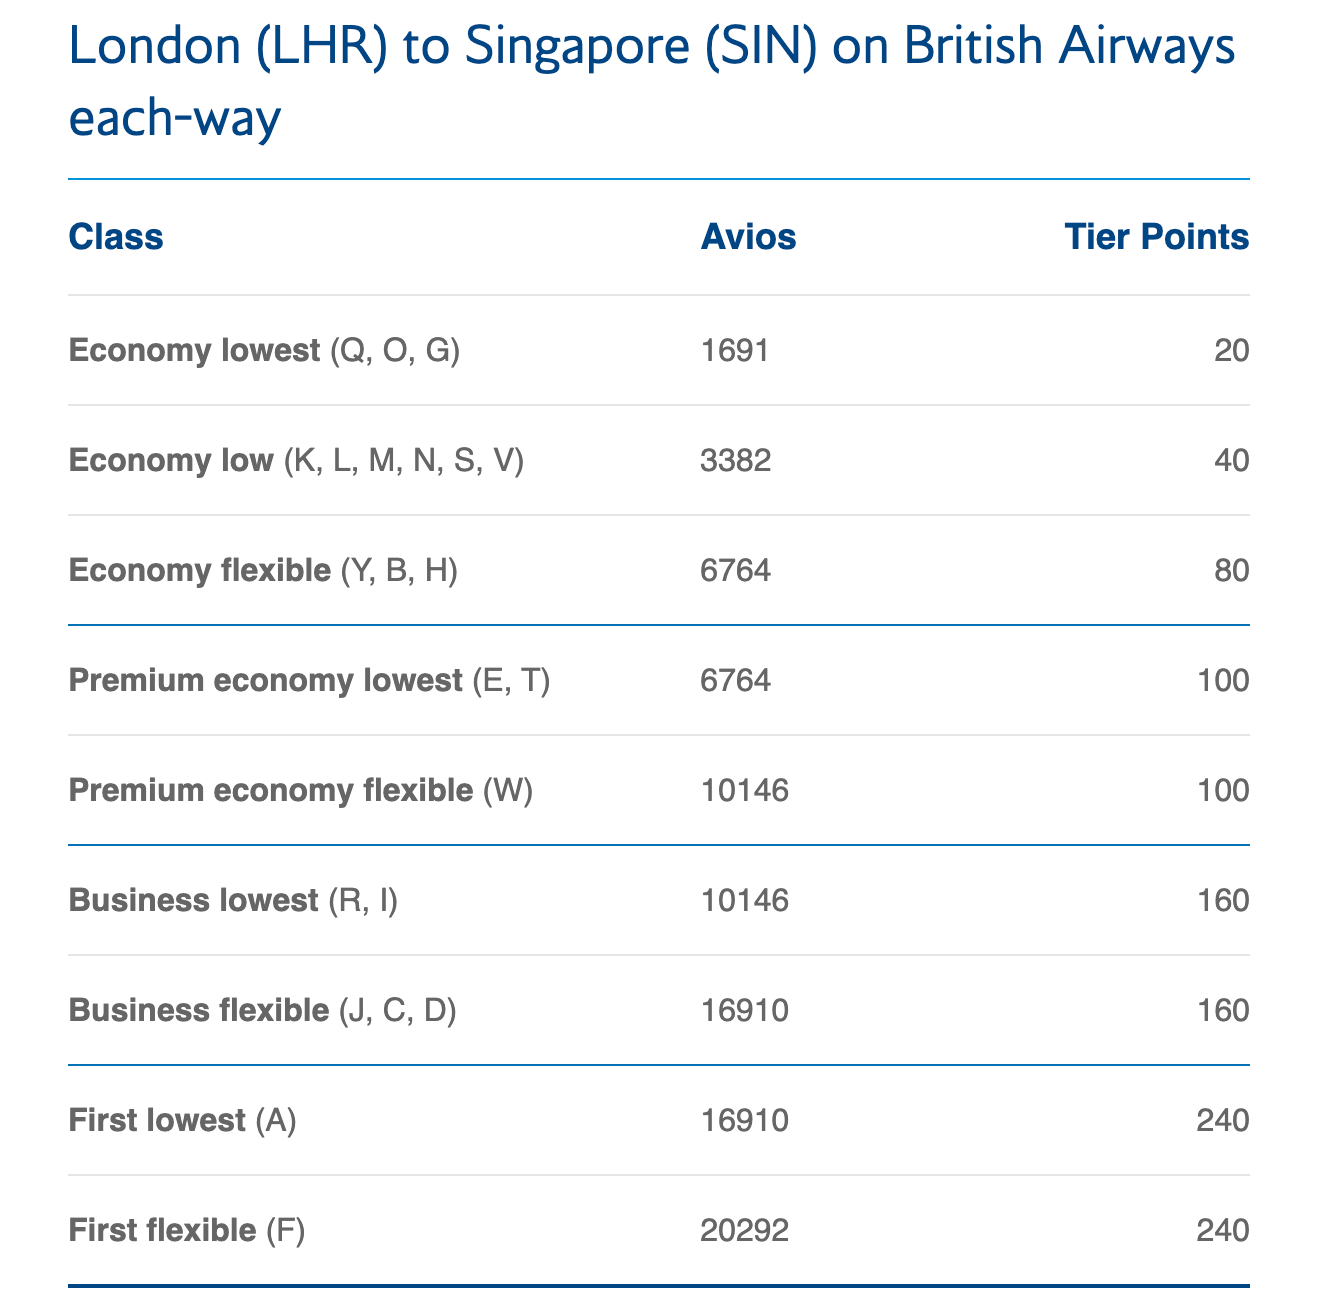 A table showing the earnings for a British Airways flight from London to Singapore.